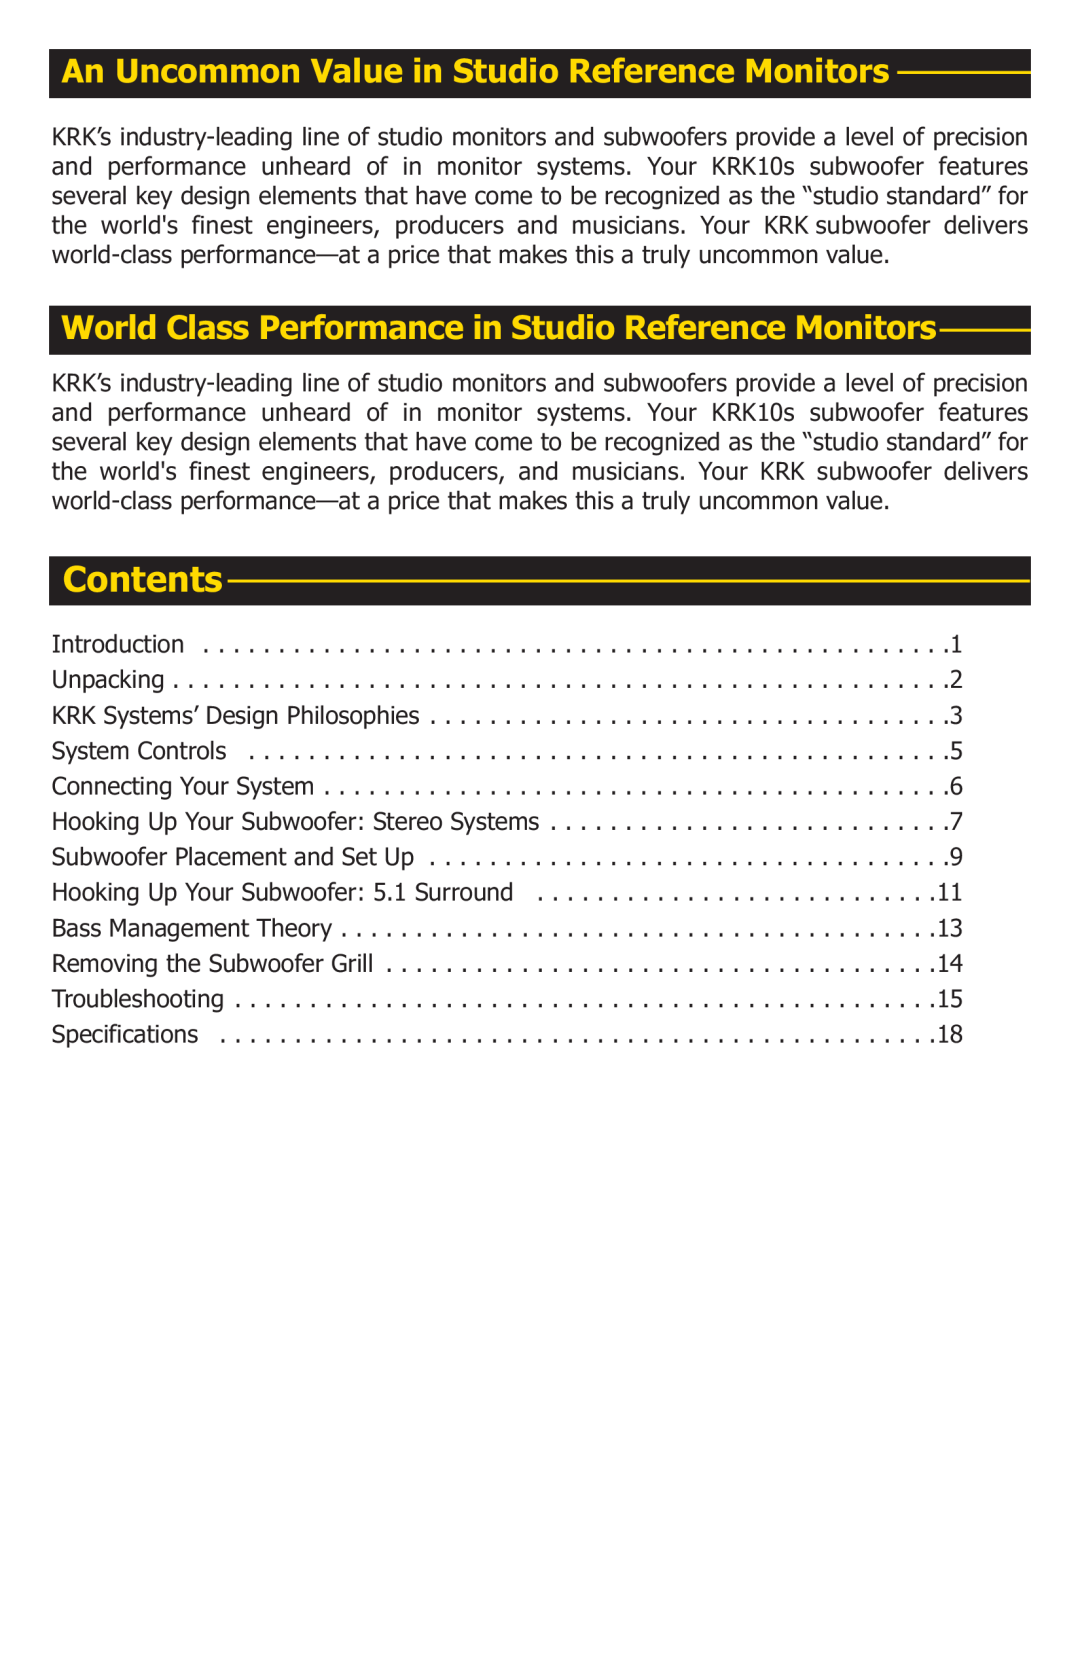 KRK 10S manual Contents, An Uncommon Value in Studio Reference Monitors 